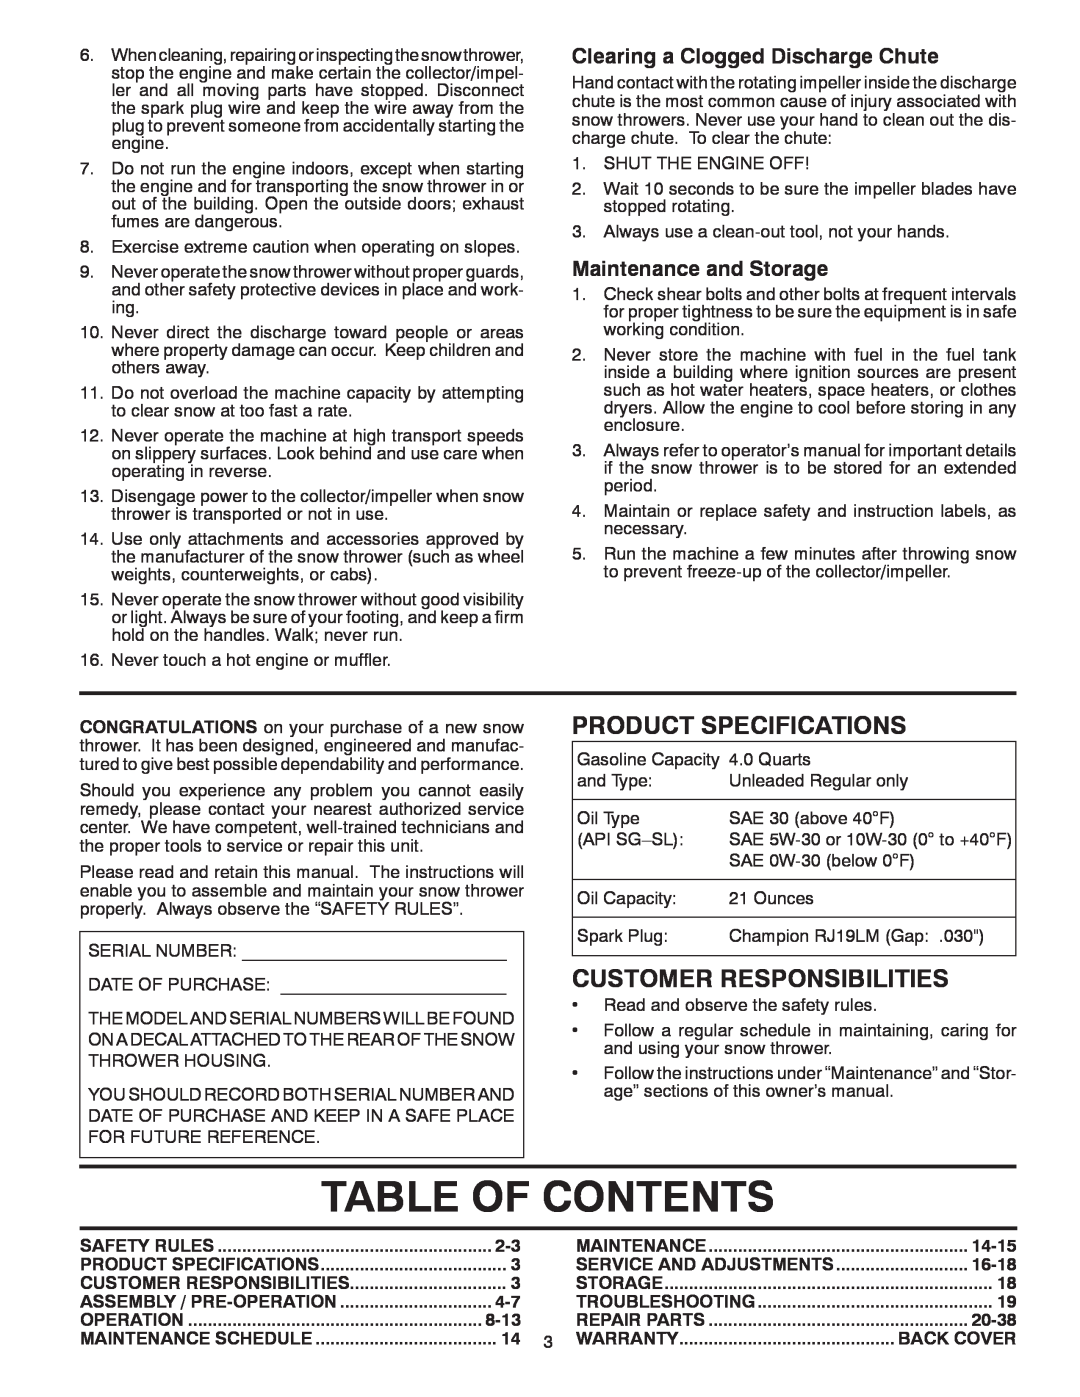 Poulan 96192002400 Table Of Contents, Product Specifications, Customer Responsibilities, Maintenance and Storage, 14-15 